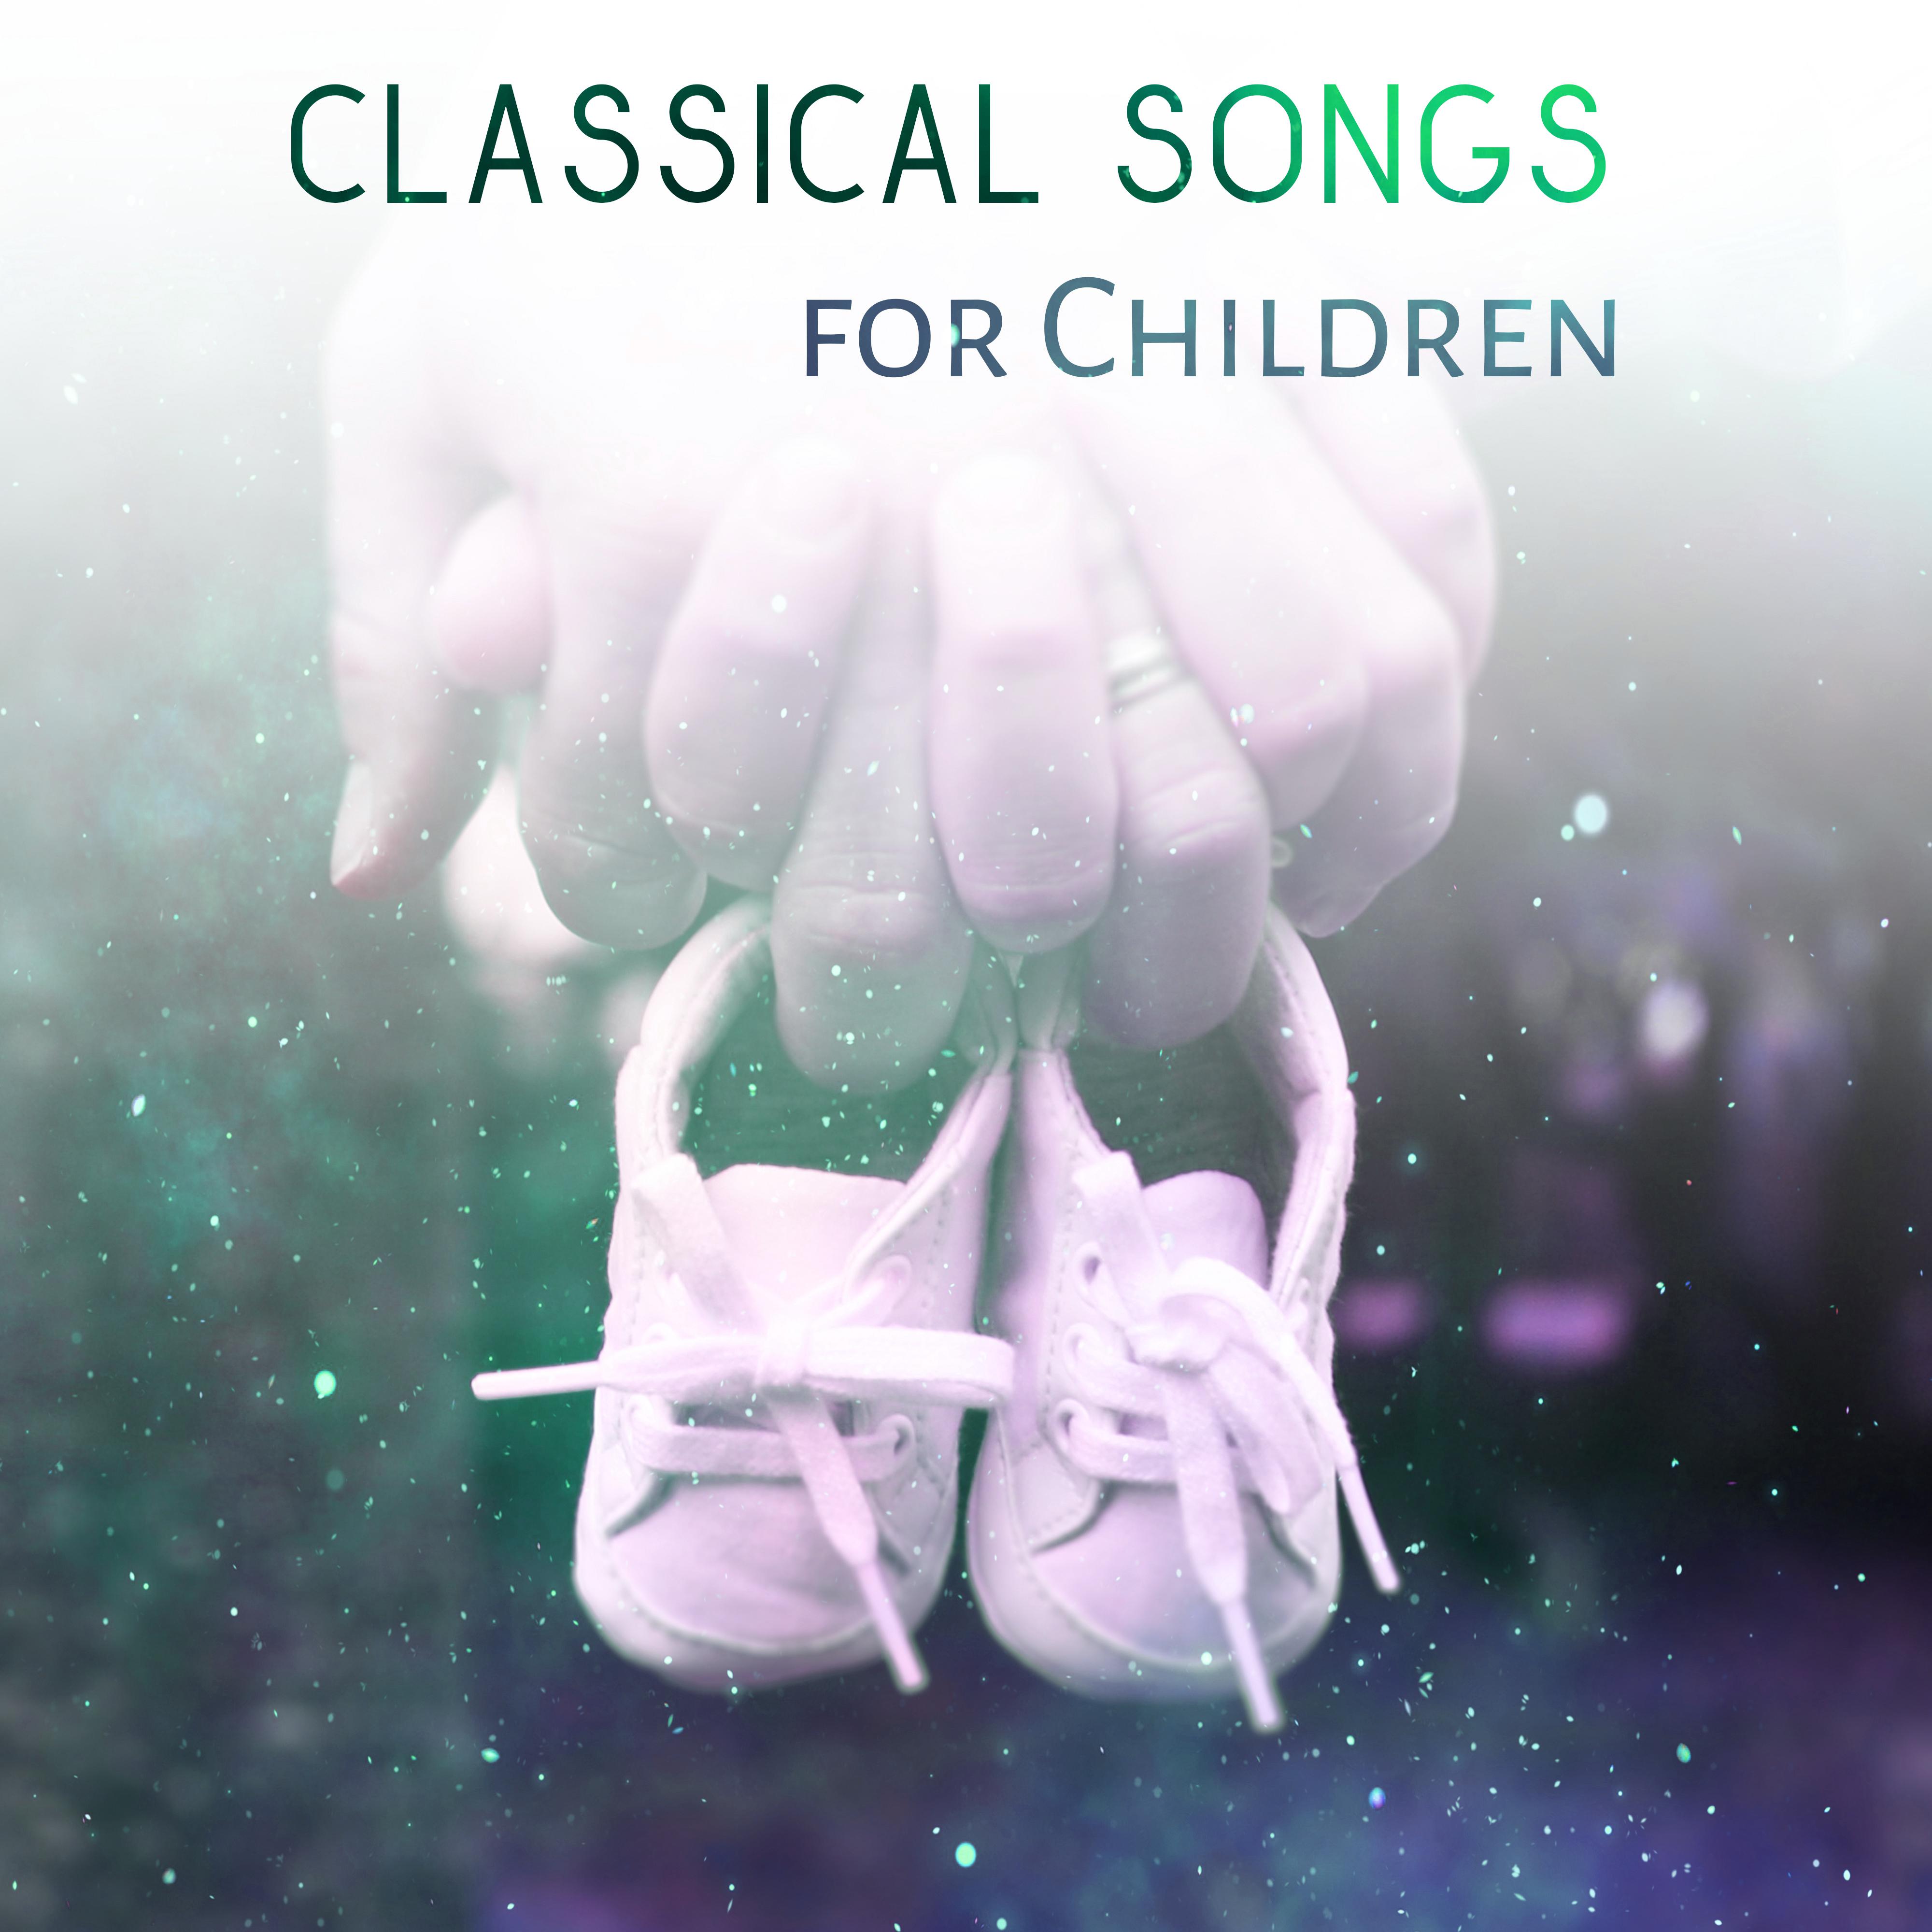 Classical Songs for Children  Smart Music Baby, Lullabies to Sleep, Babies Relaxation